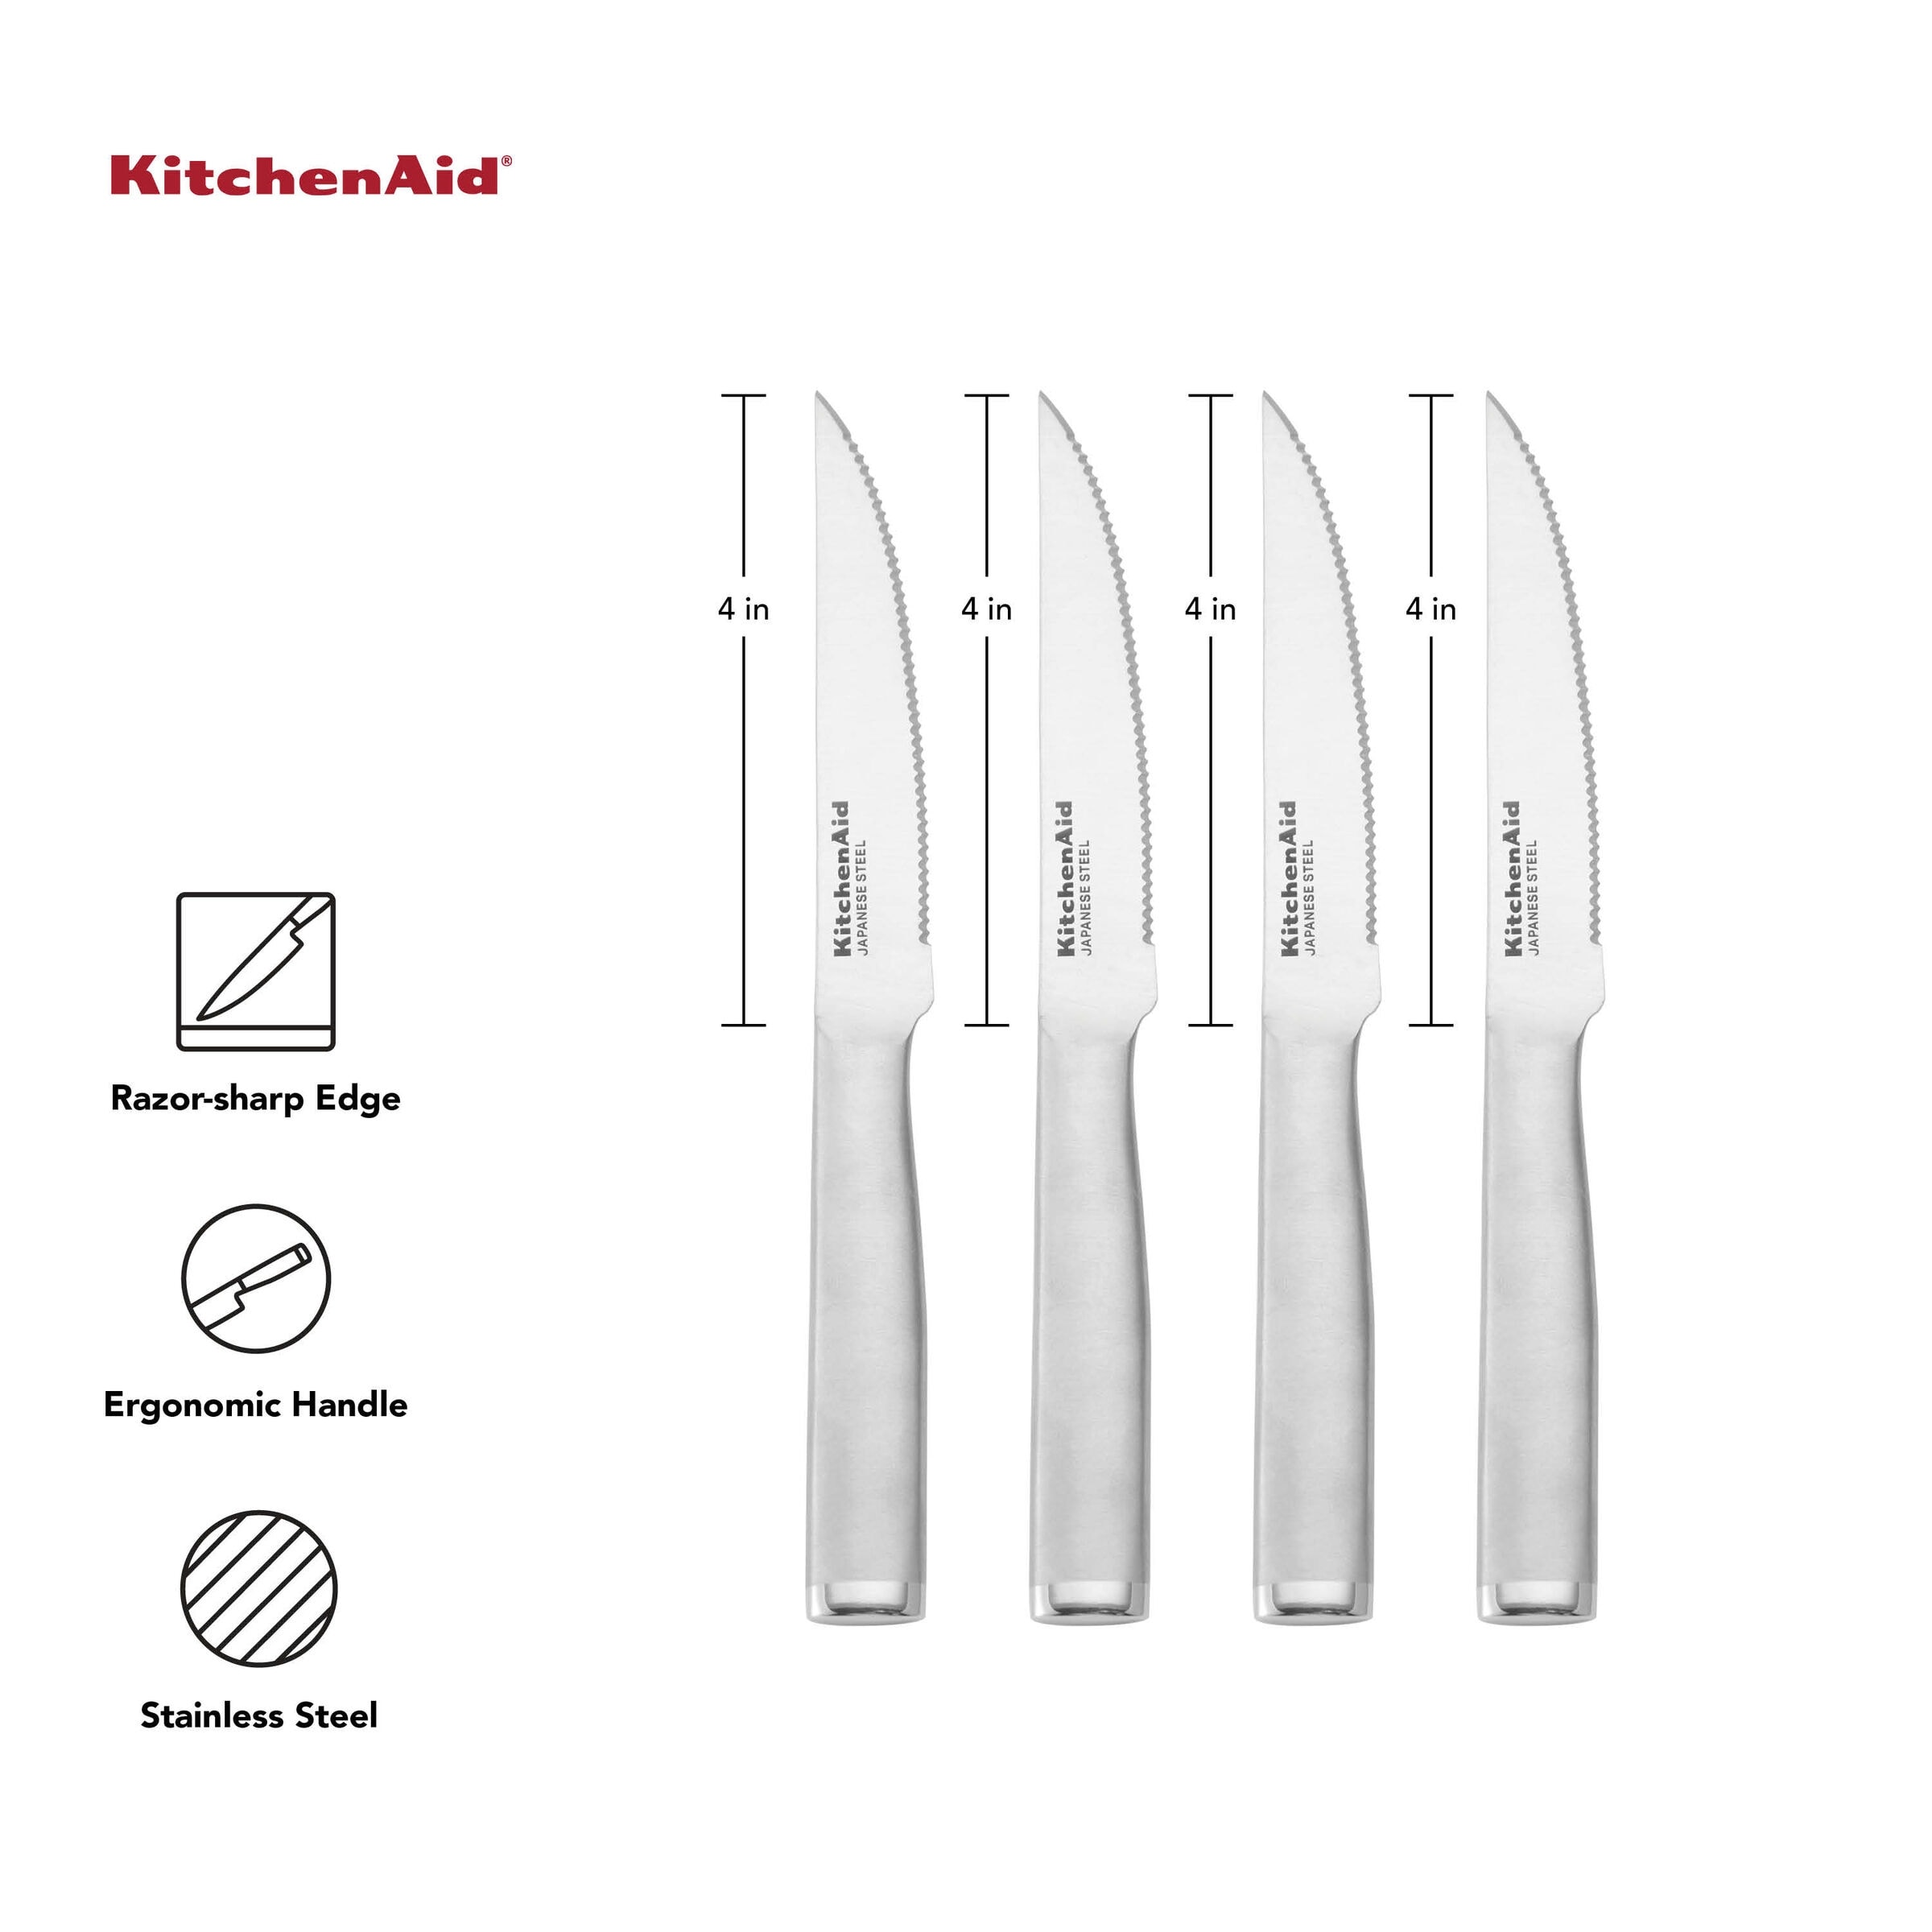 https://ak1.ostkcdn.com/images/products/is/images/direct/6a8701ae57b9f4b8f4cfc17aafc5a4fd9c2b5415/KitchenAid-Gourmet-4-Piece-Steak-Knife-Set%2C-4.5-Inch%2C-Stainless-Steel.jpg